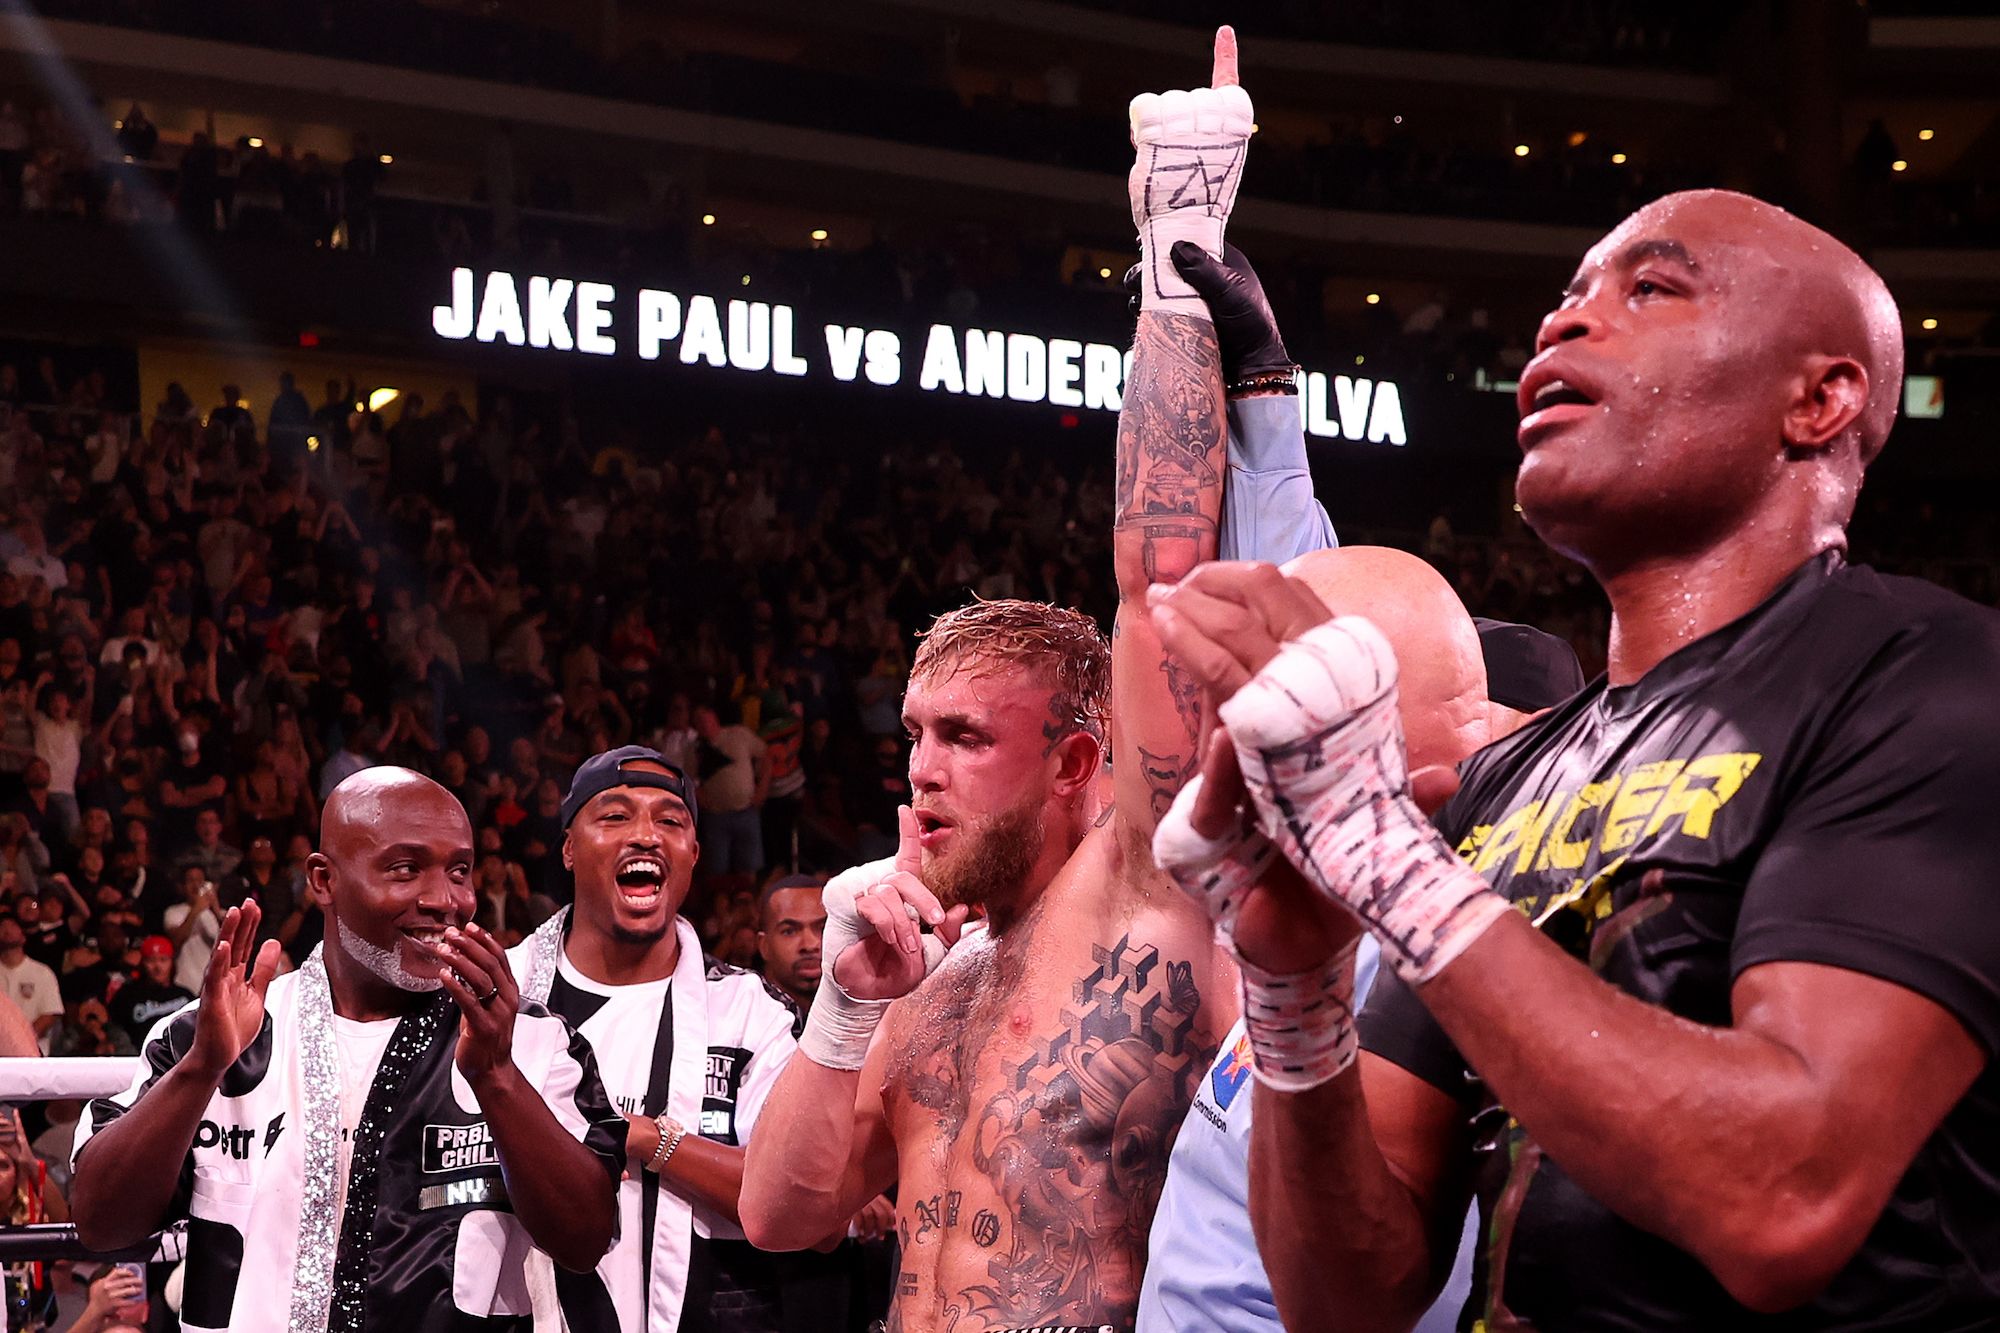 Jake Paul beats Anderson Silva by unanimous decision after 8 rounds of boxing action